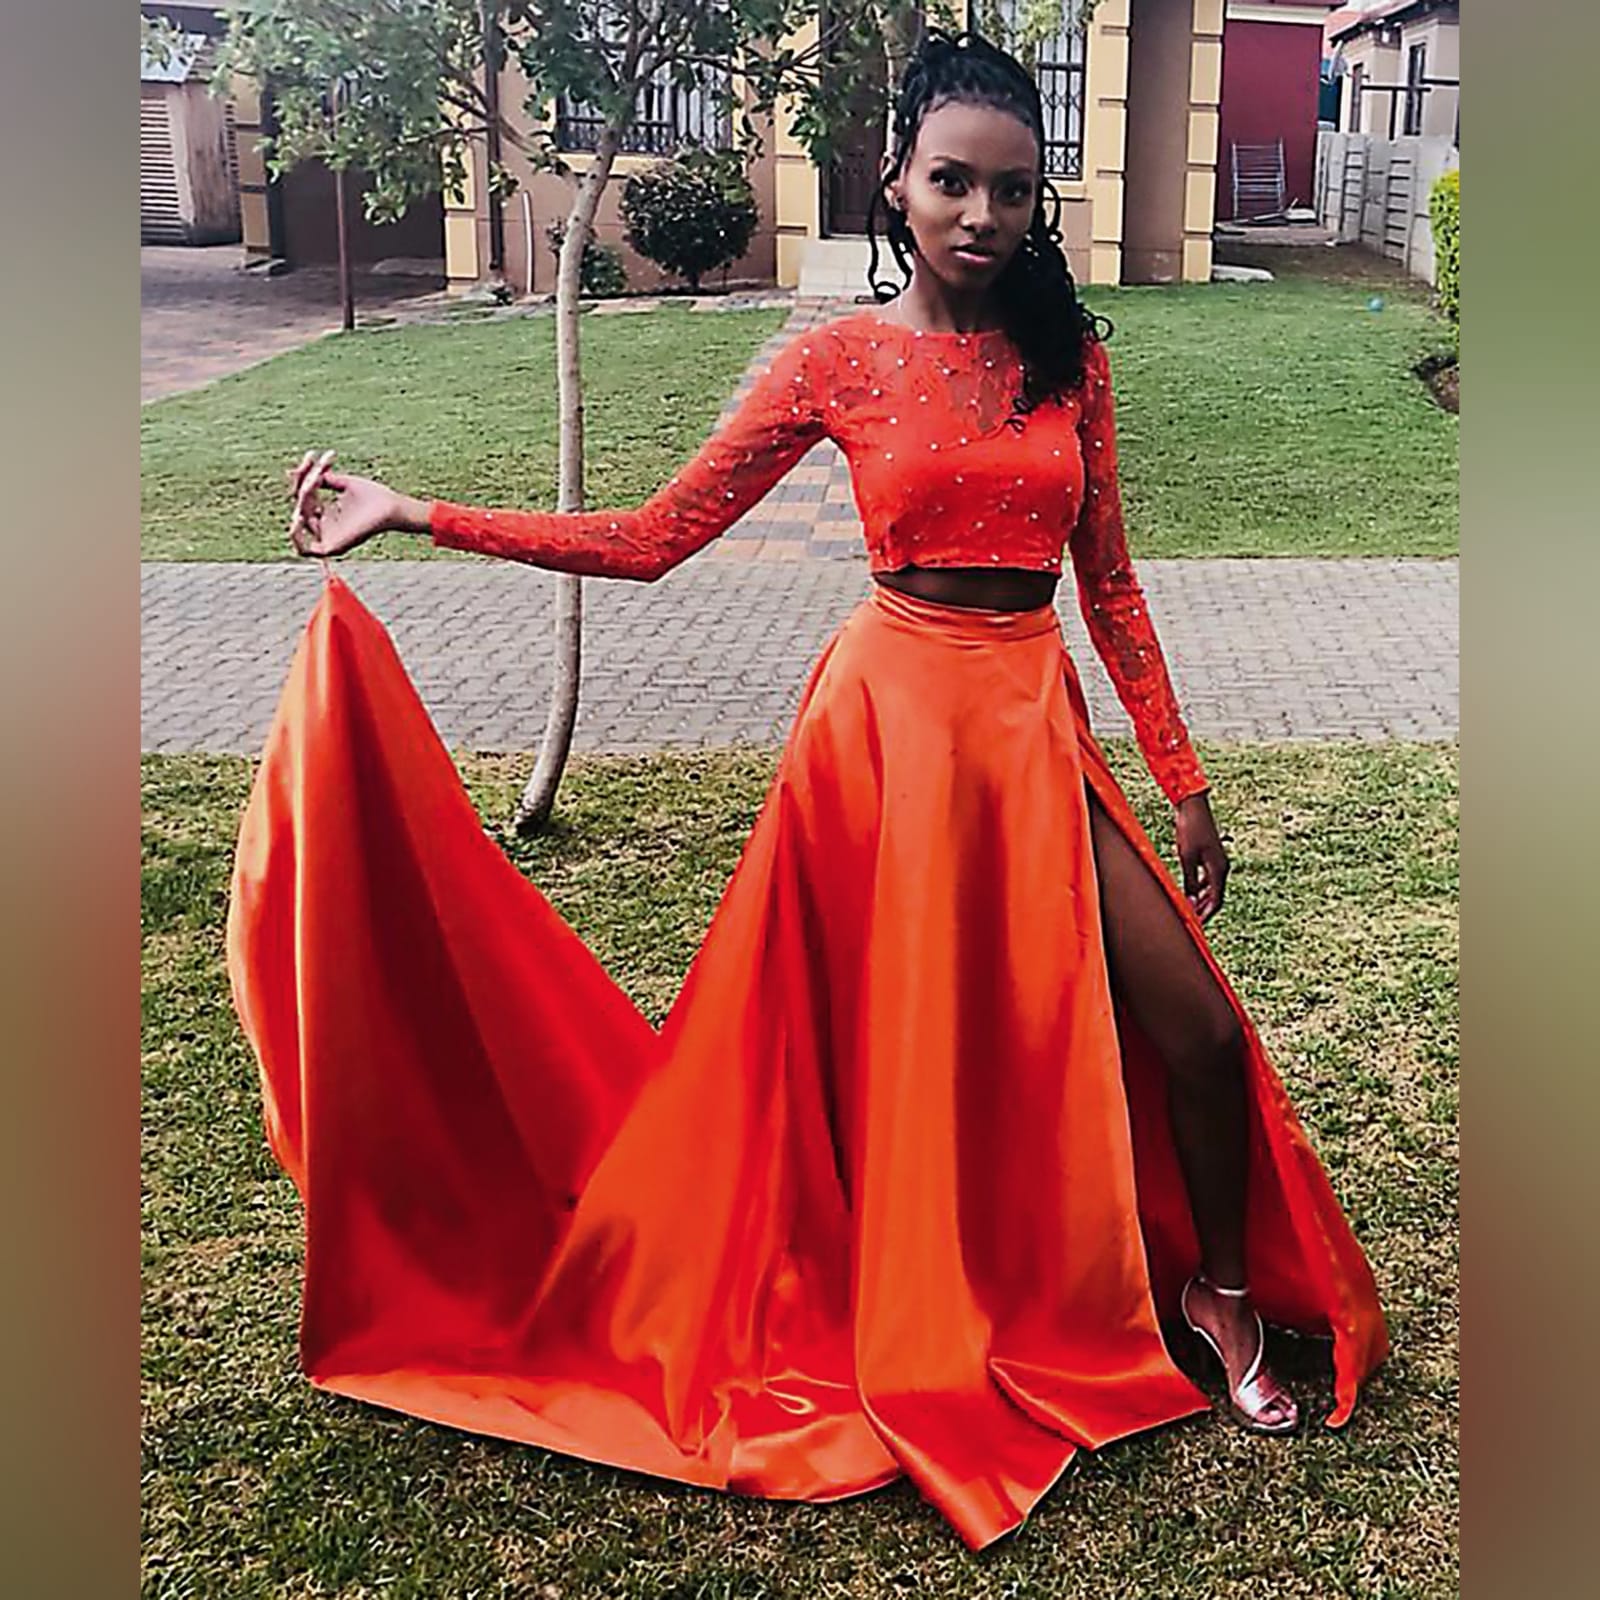 2 piece orange prom dress with a lace crop top 1 2 piece orange prom dress with a lace crop top detailed with silver beads. Flowy, shiny skirt with crossed slit and long train.